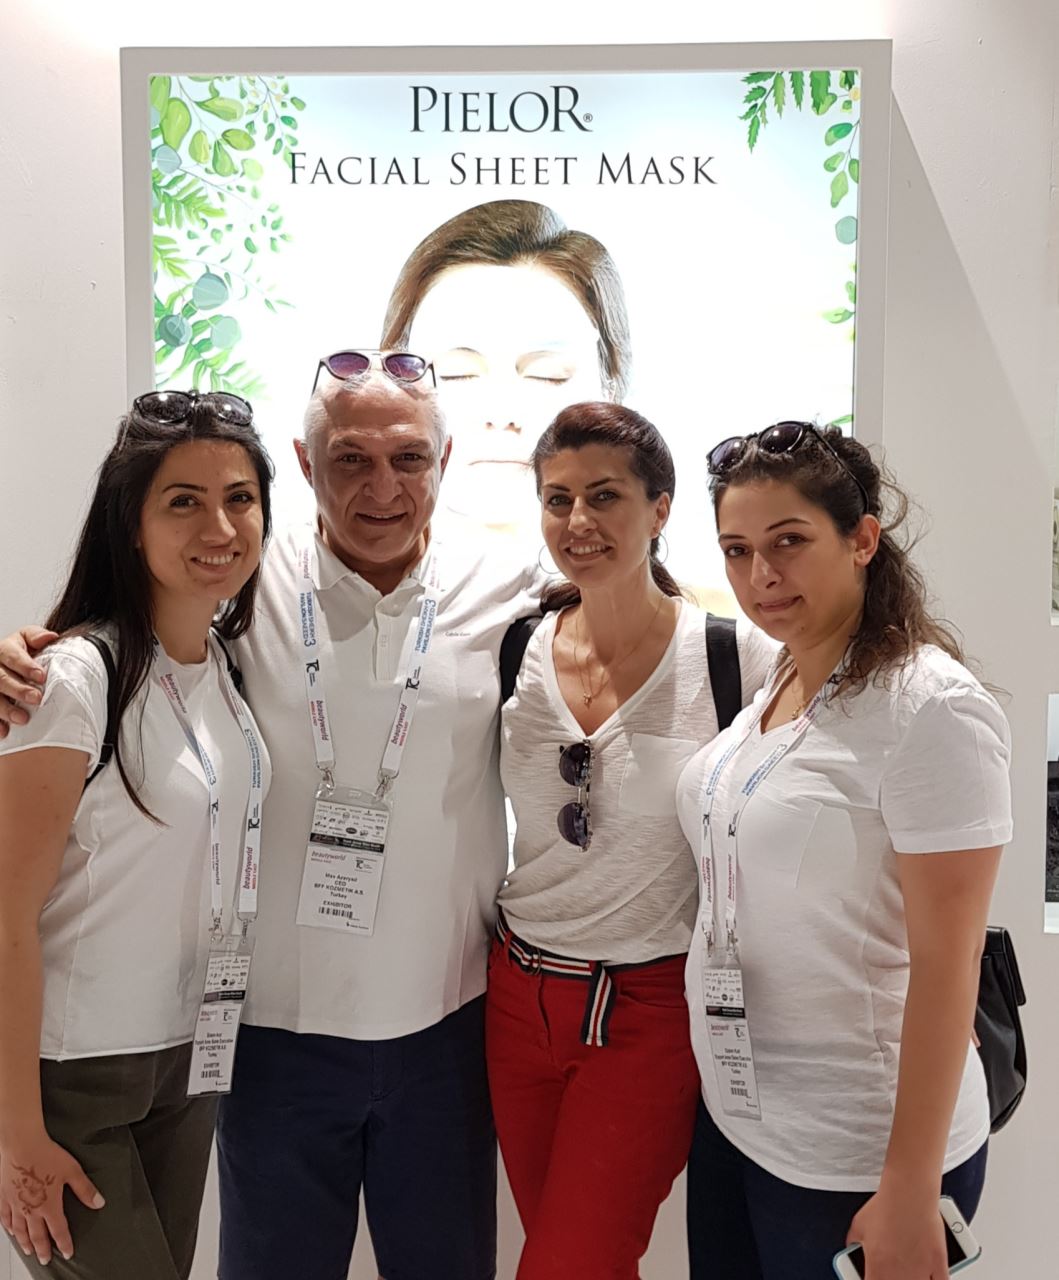 PIELOR met visitors at Beautyworld Middle East!